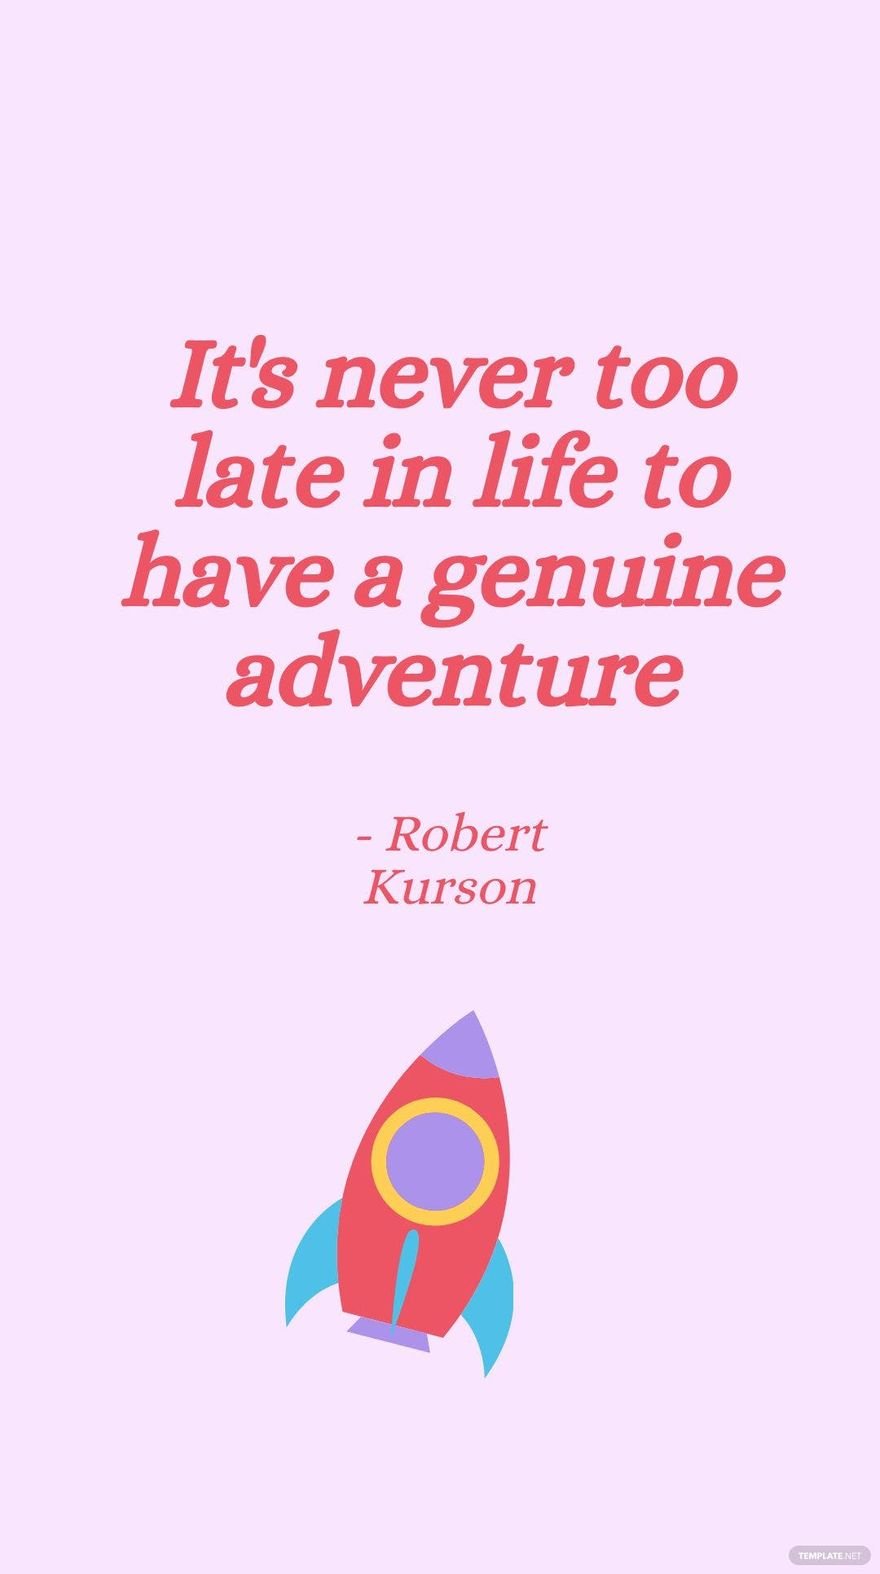 Robert Kurson - It's never too late in life to have a genuine adventure